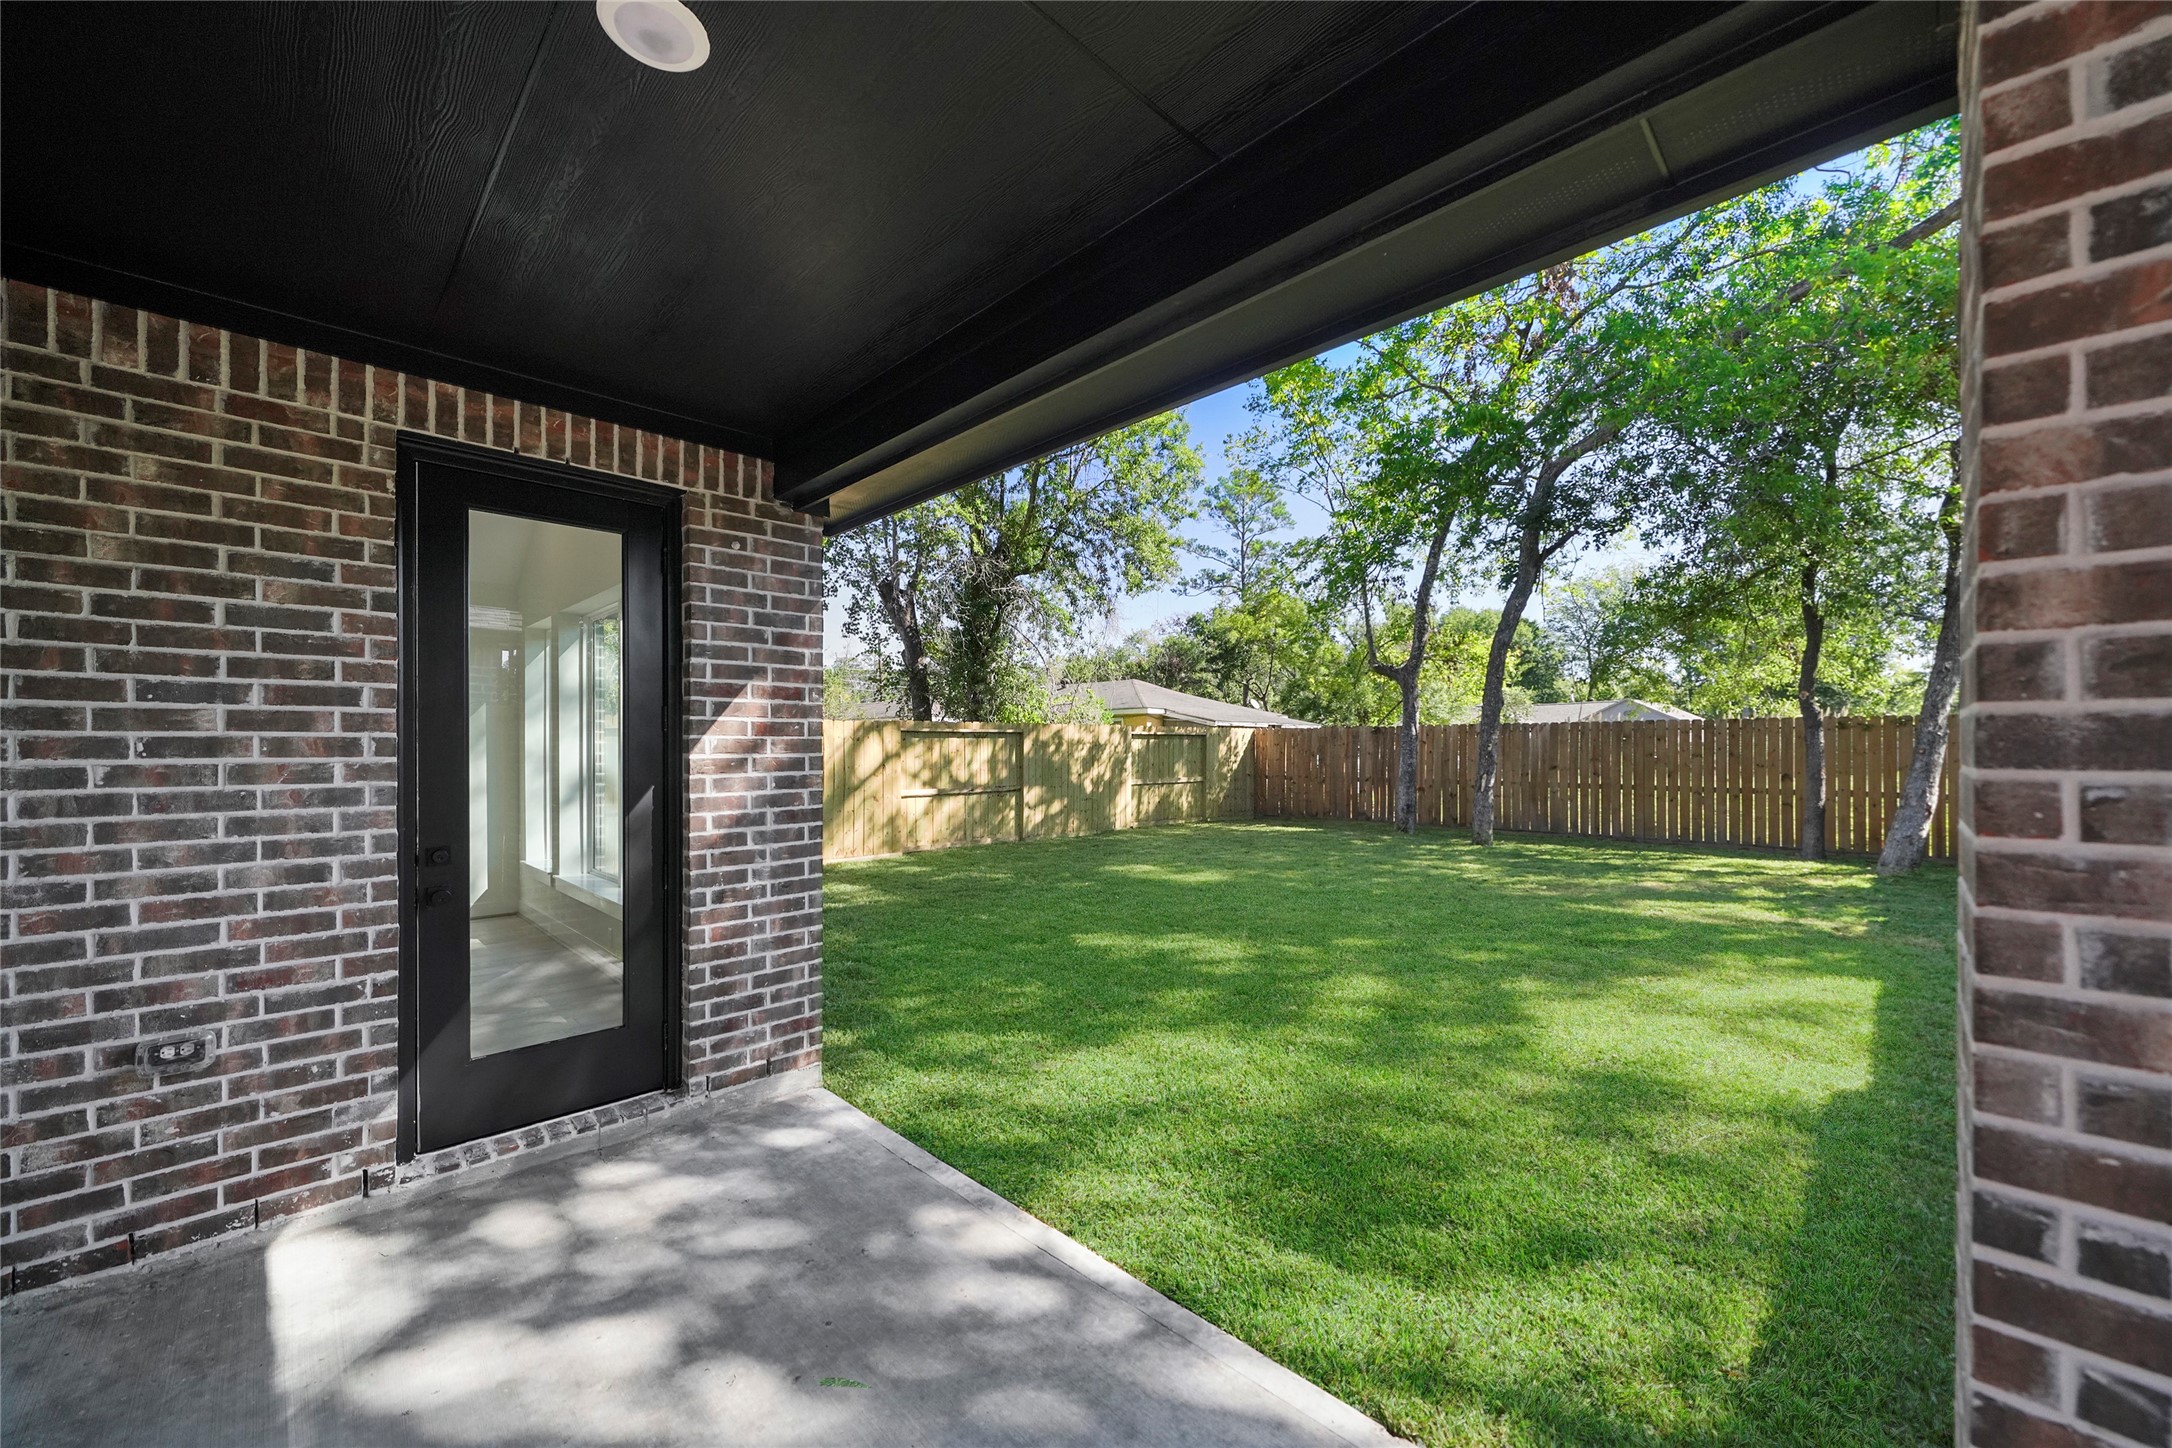 If you have additional questions regarding 6436 Cebra  in Houston or would like to tour the property with us call 800-660-1022 and reference MLS# 64253313.